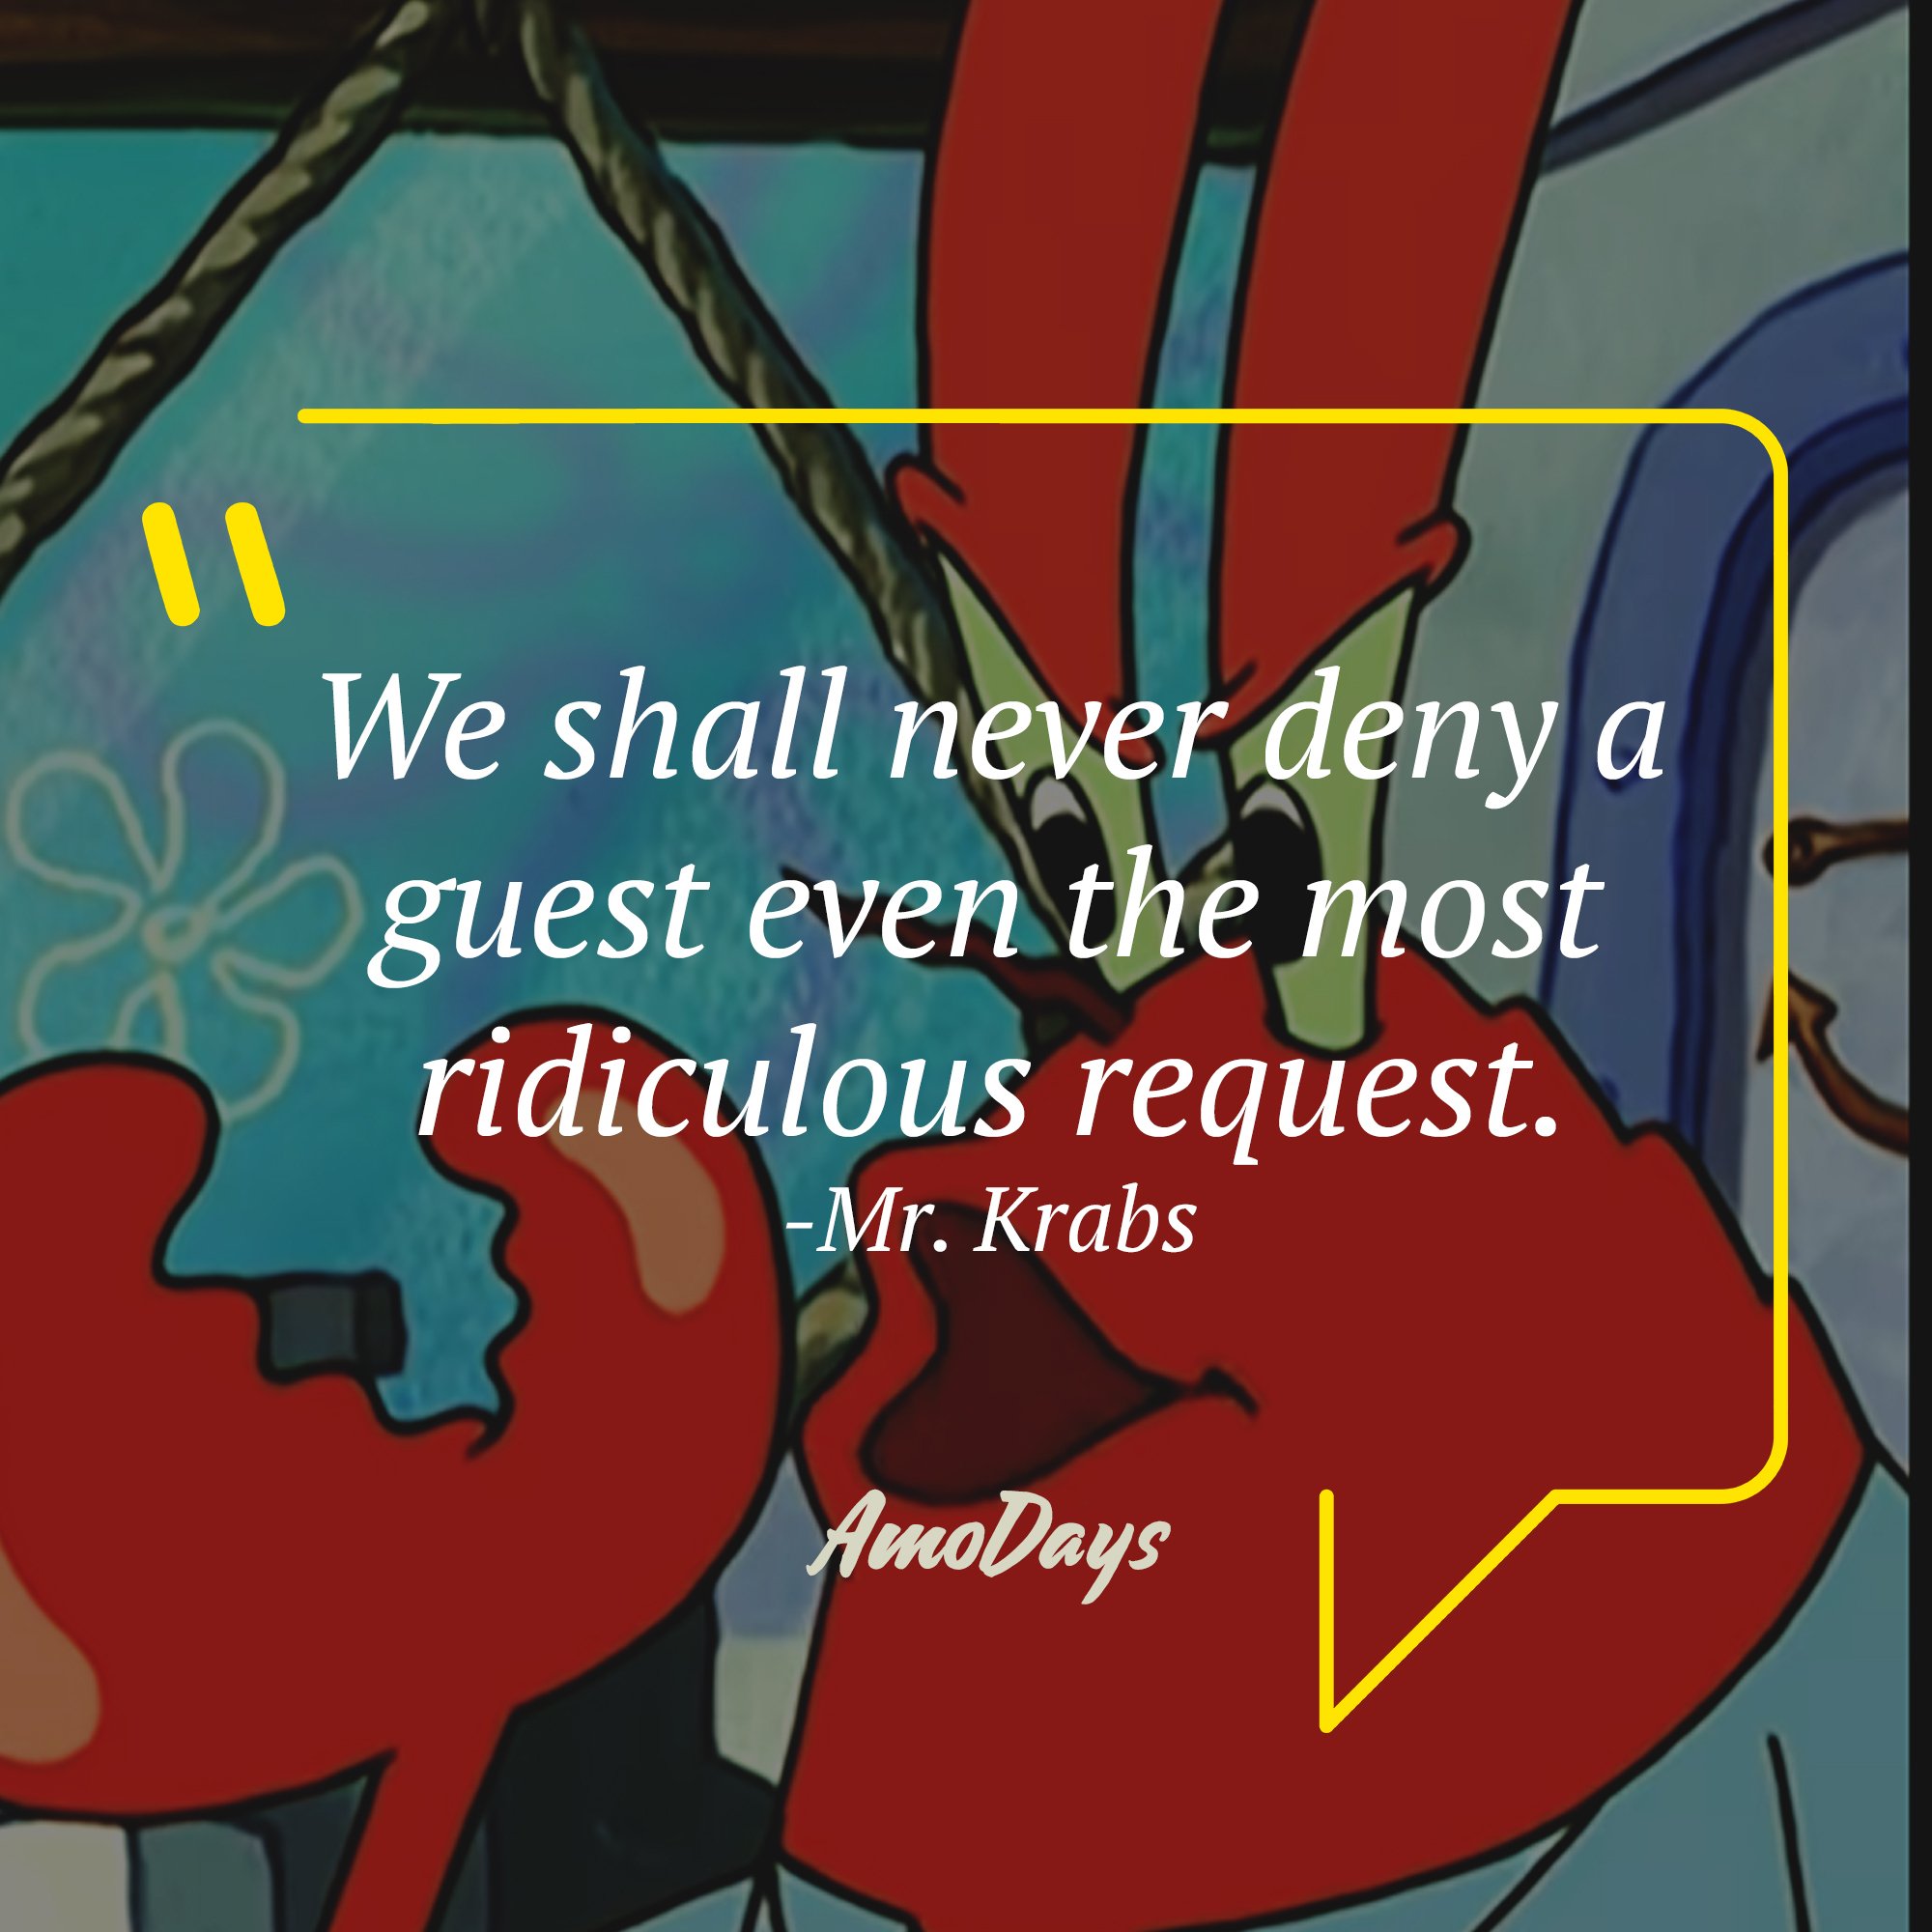 Mr. Krabs's quote: "We shall never deny a guest even the most ridiculous request." | Source: AmoDays